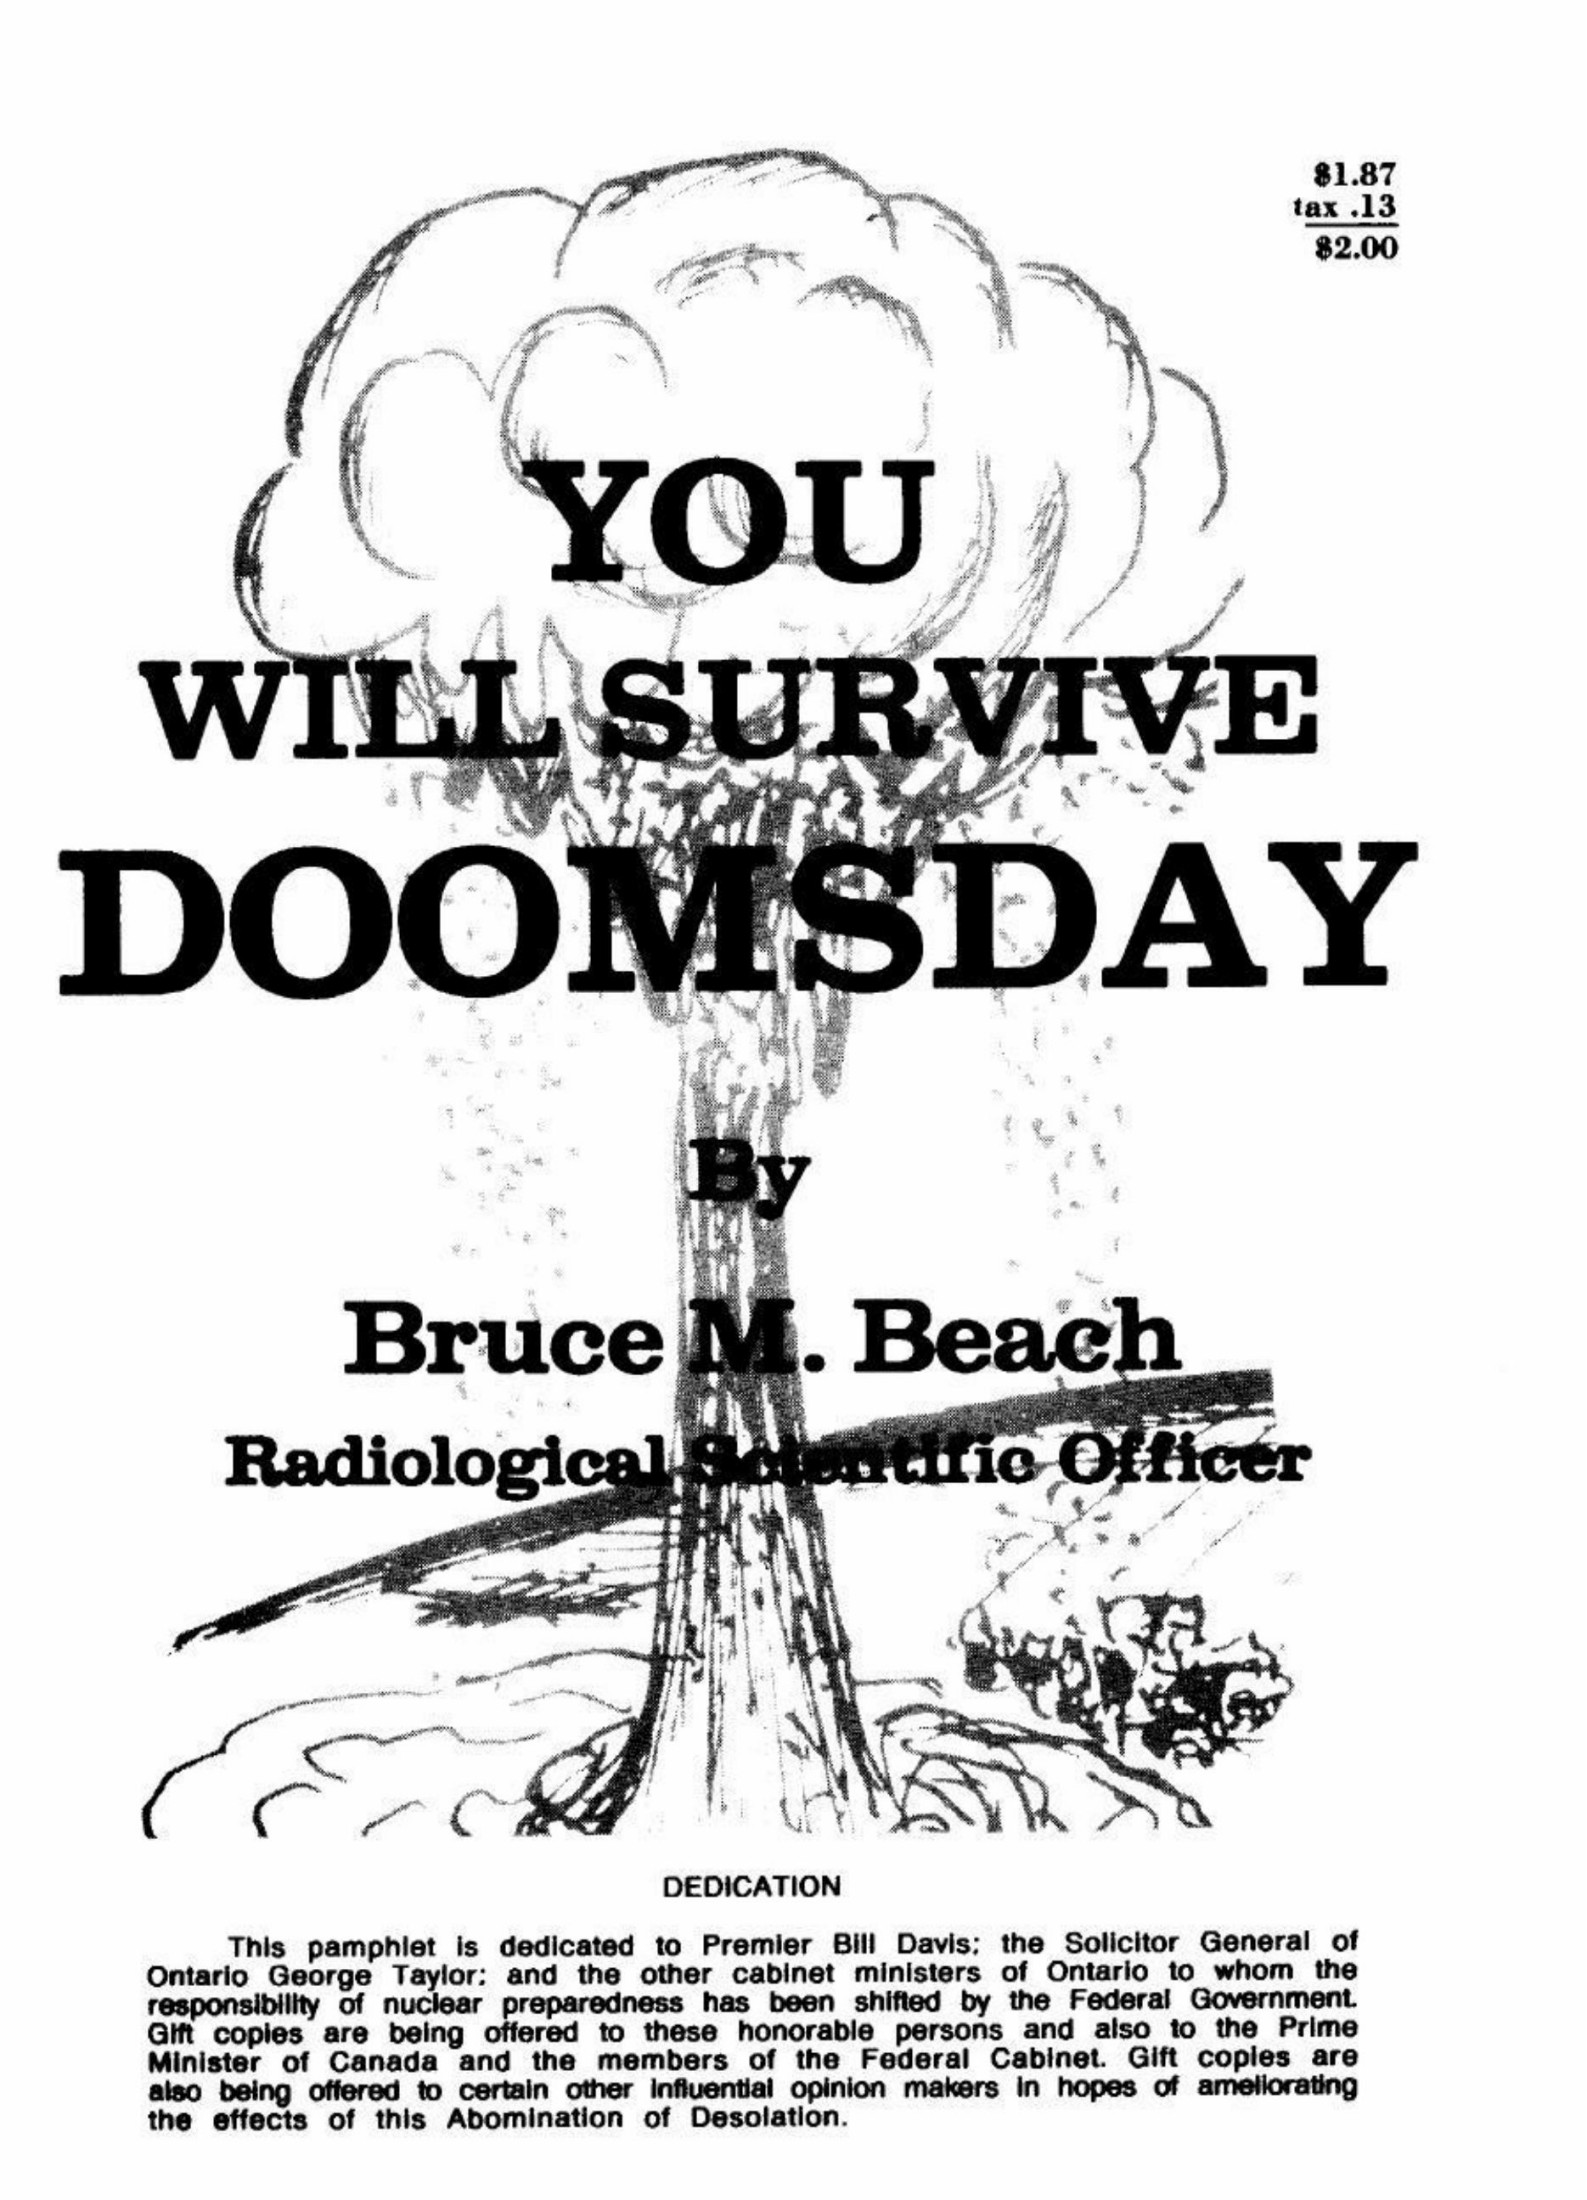 You Will Survive Doomsday